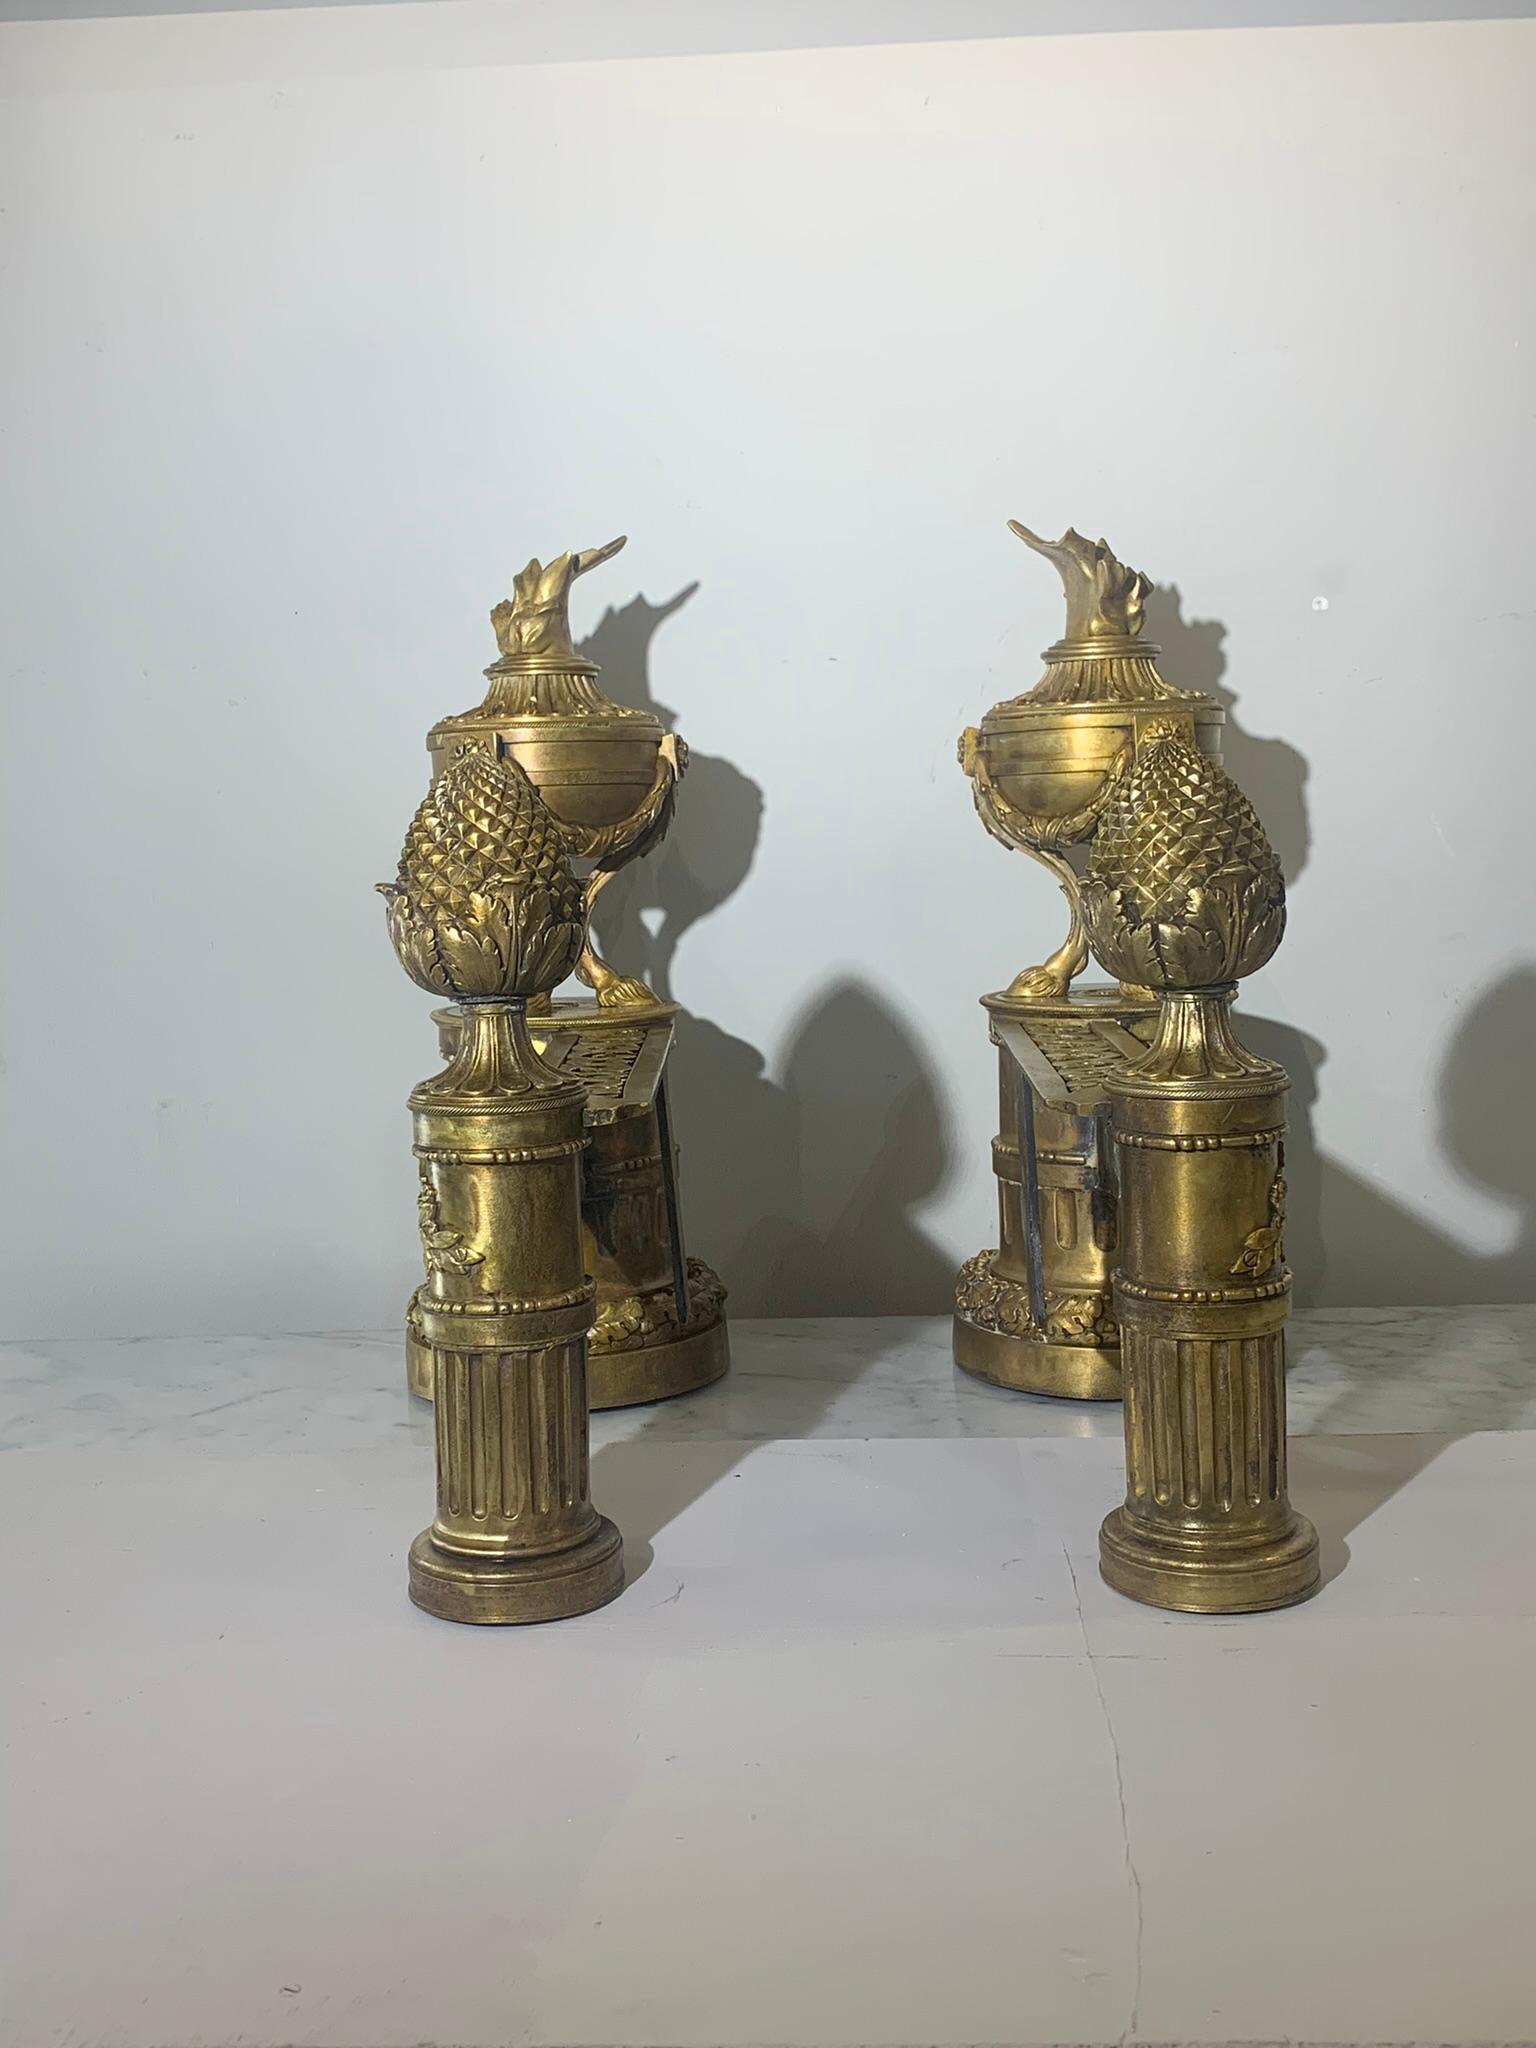 LATE 18th CENTURY PAIR OF NEOCLASSICAL GILDED BRONZE ANDIRONS For Sale 12